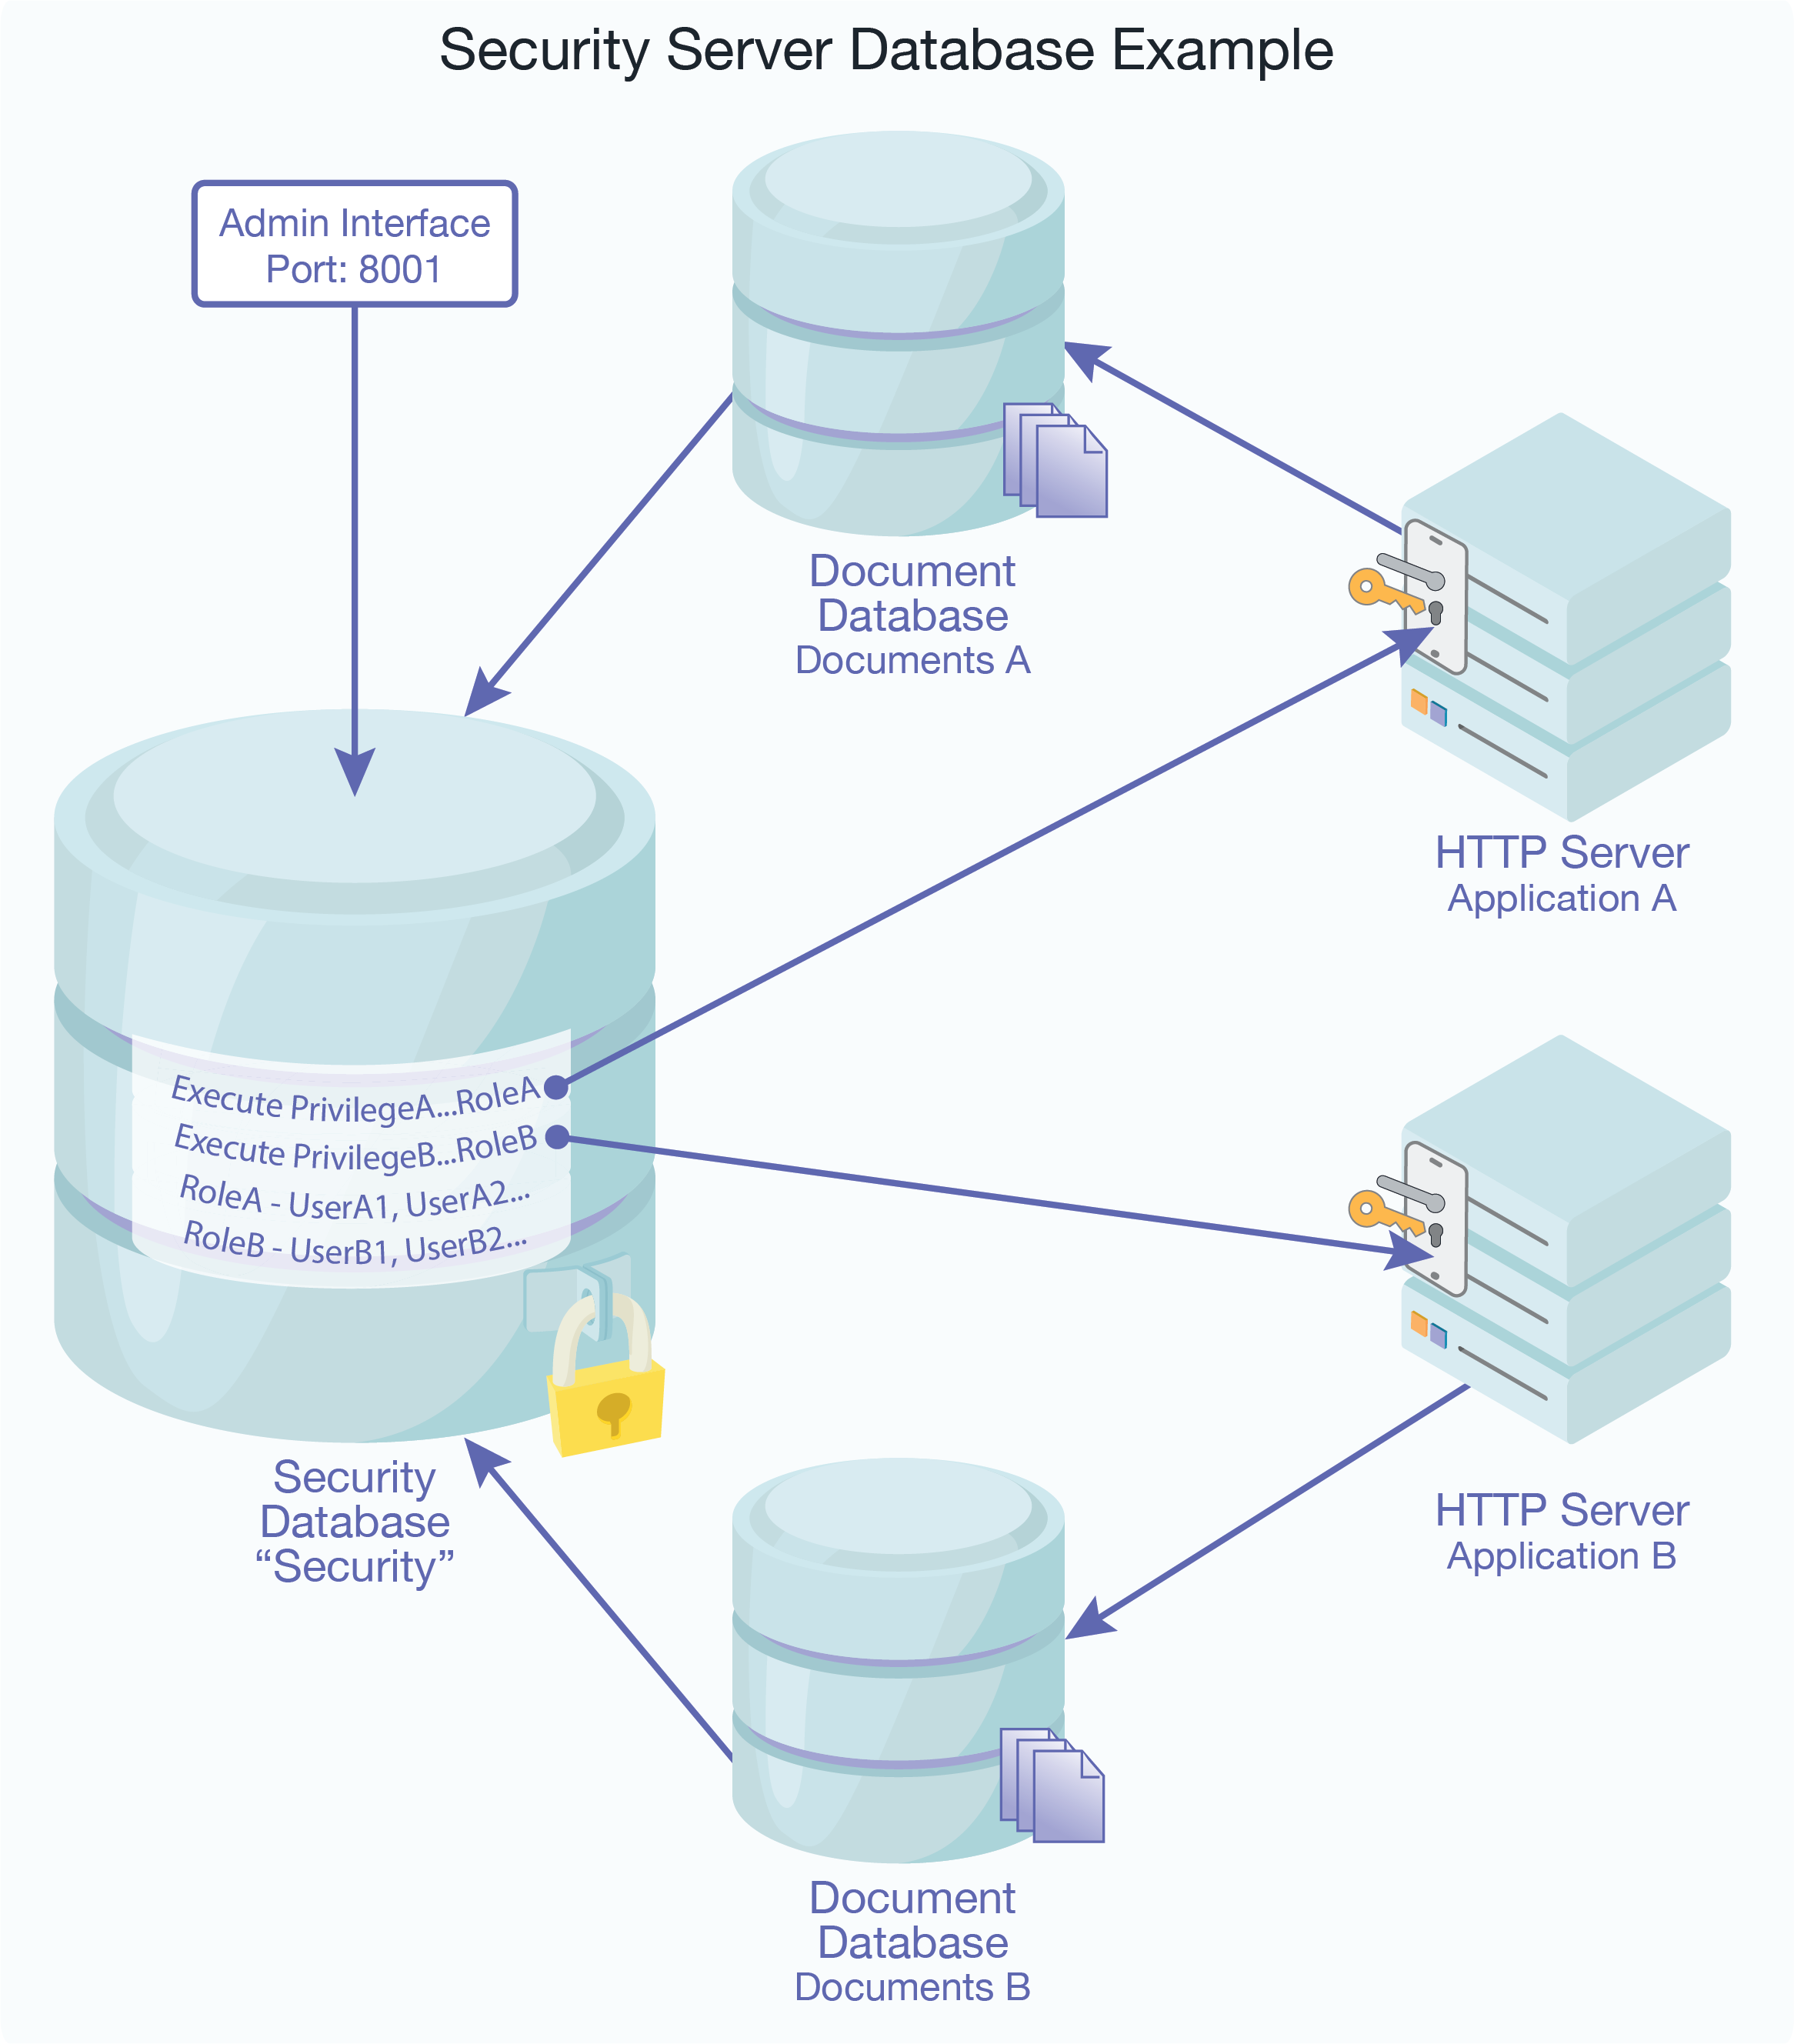 Diagram illustrating different servers sharing the Security database